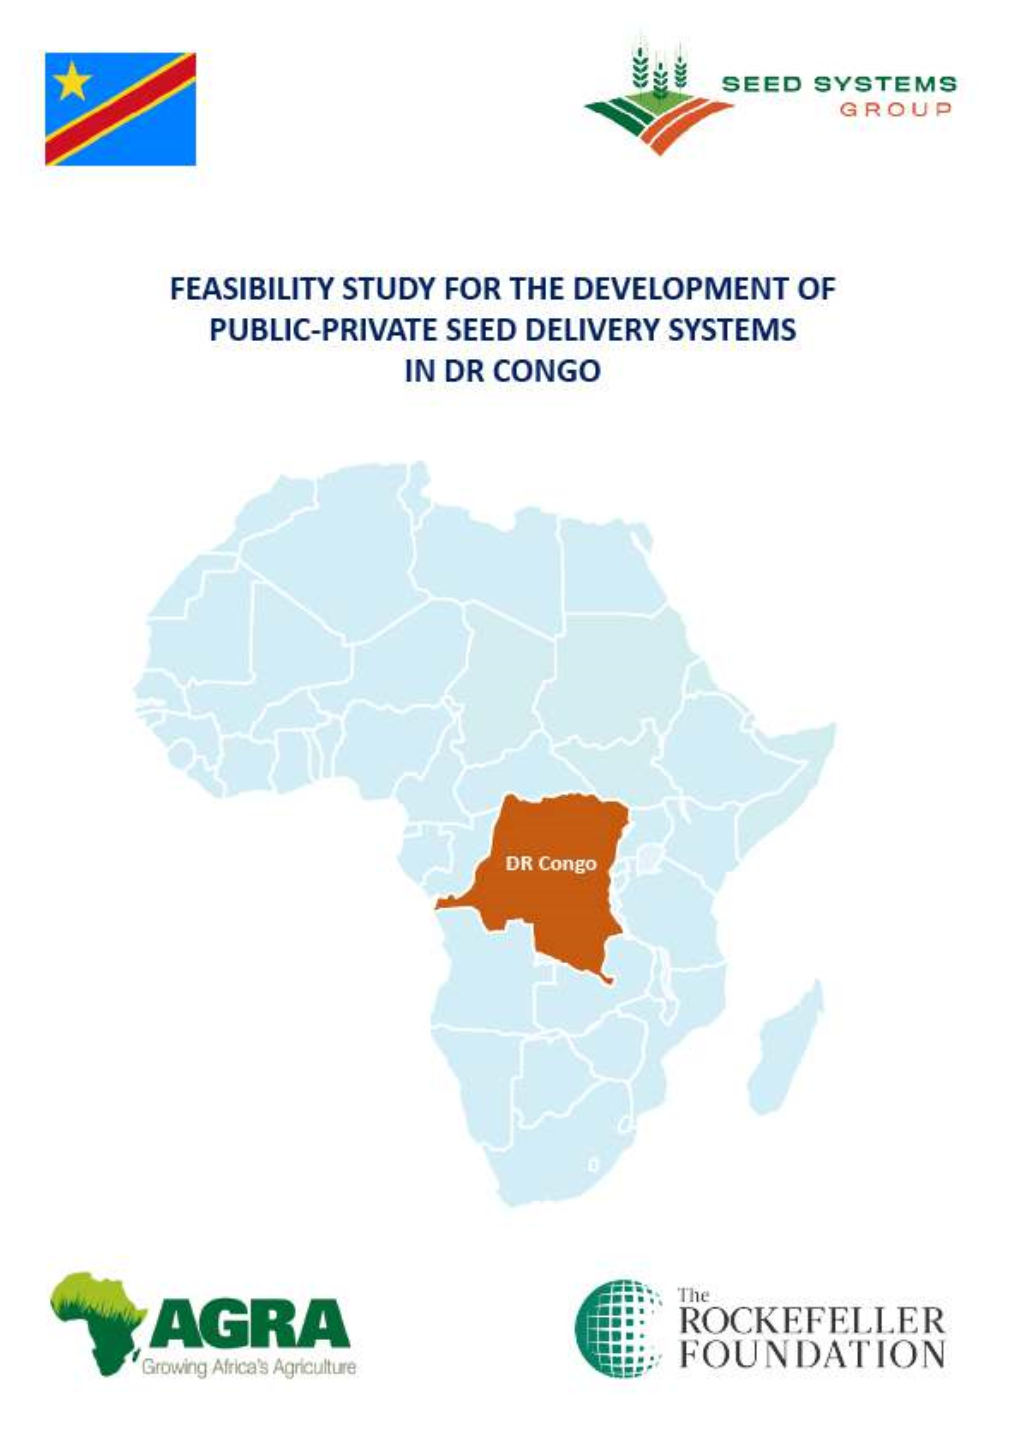 Report Ondemocratic Republic of Congo Seed Systems